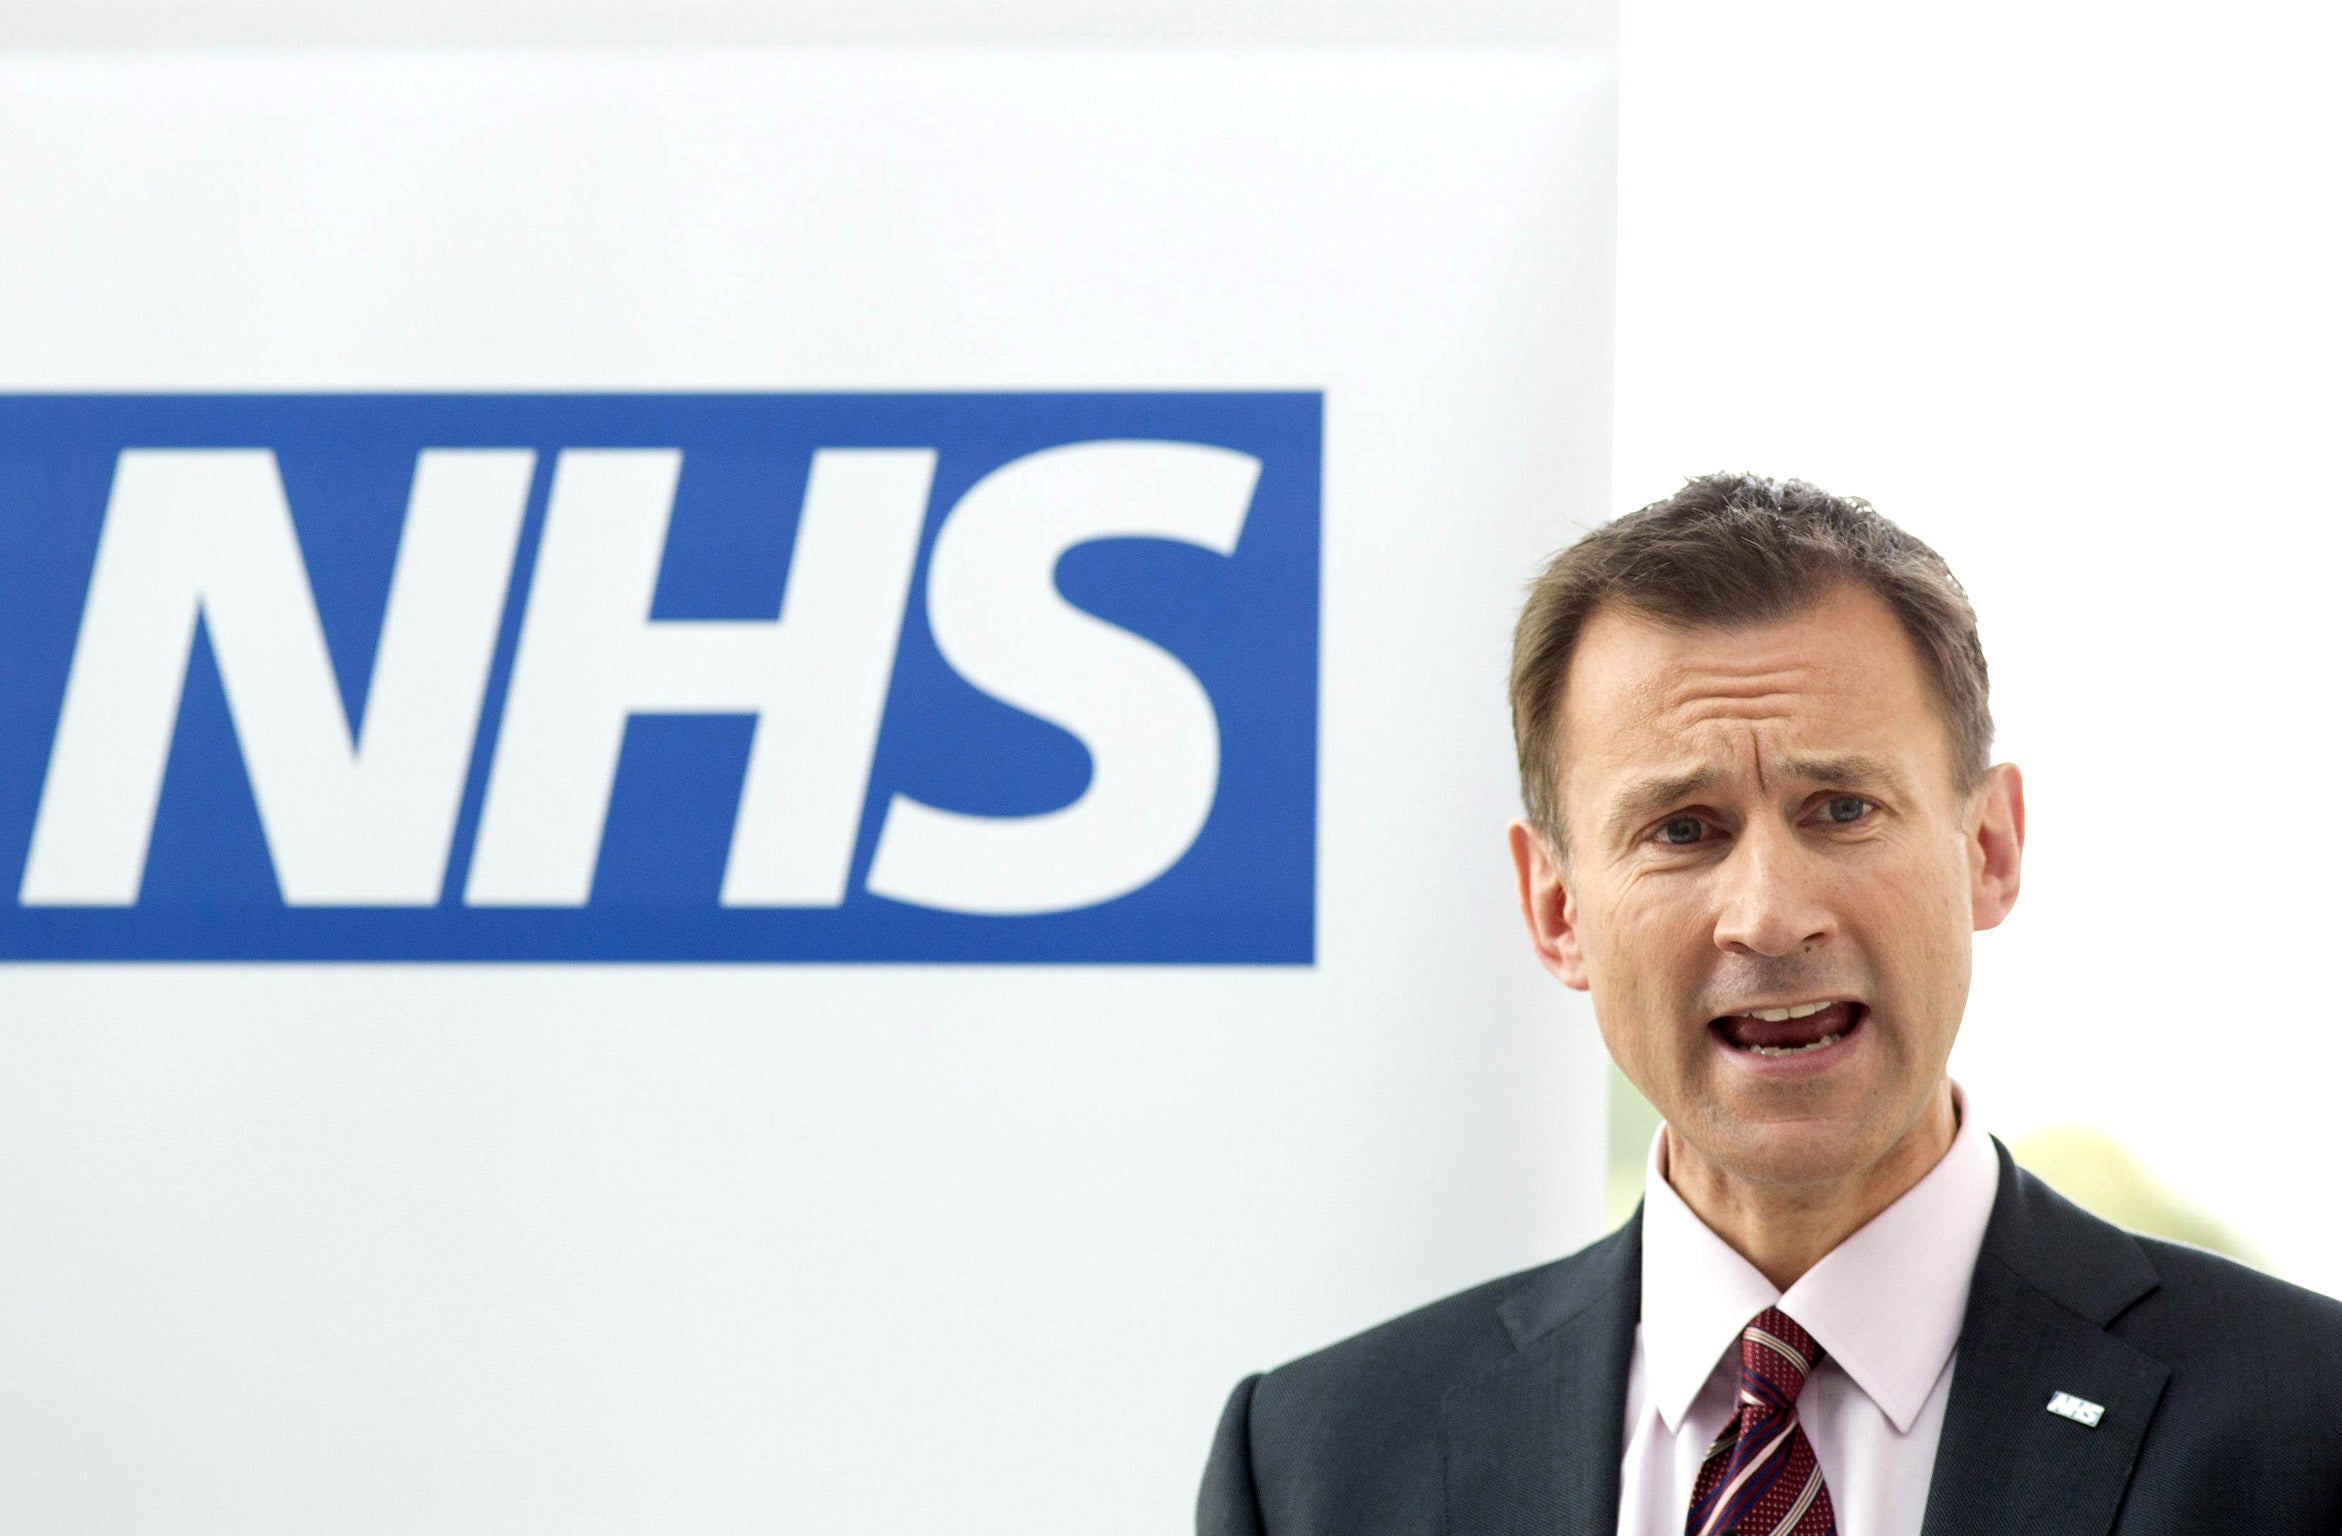 Health Secretary Jeremy Hunt has received complaints from patients who have been 'passed around hospital'